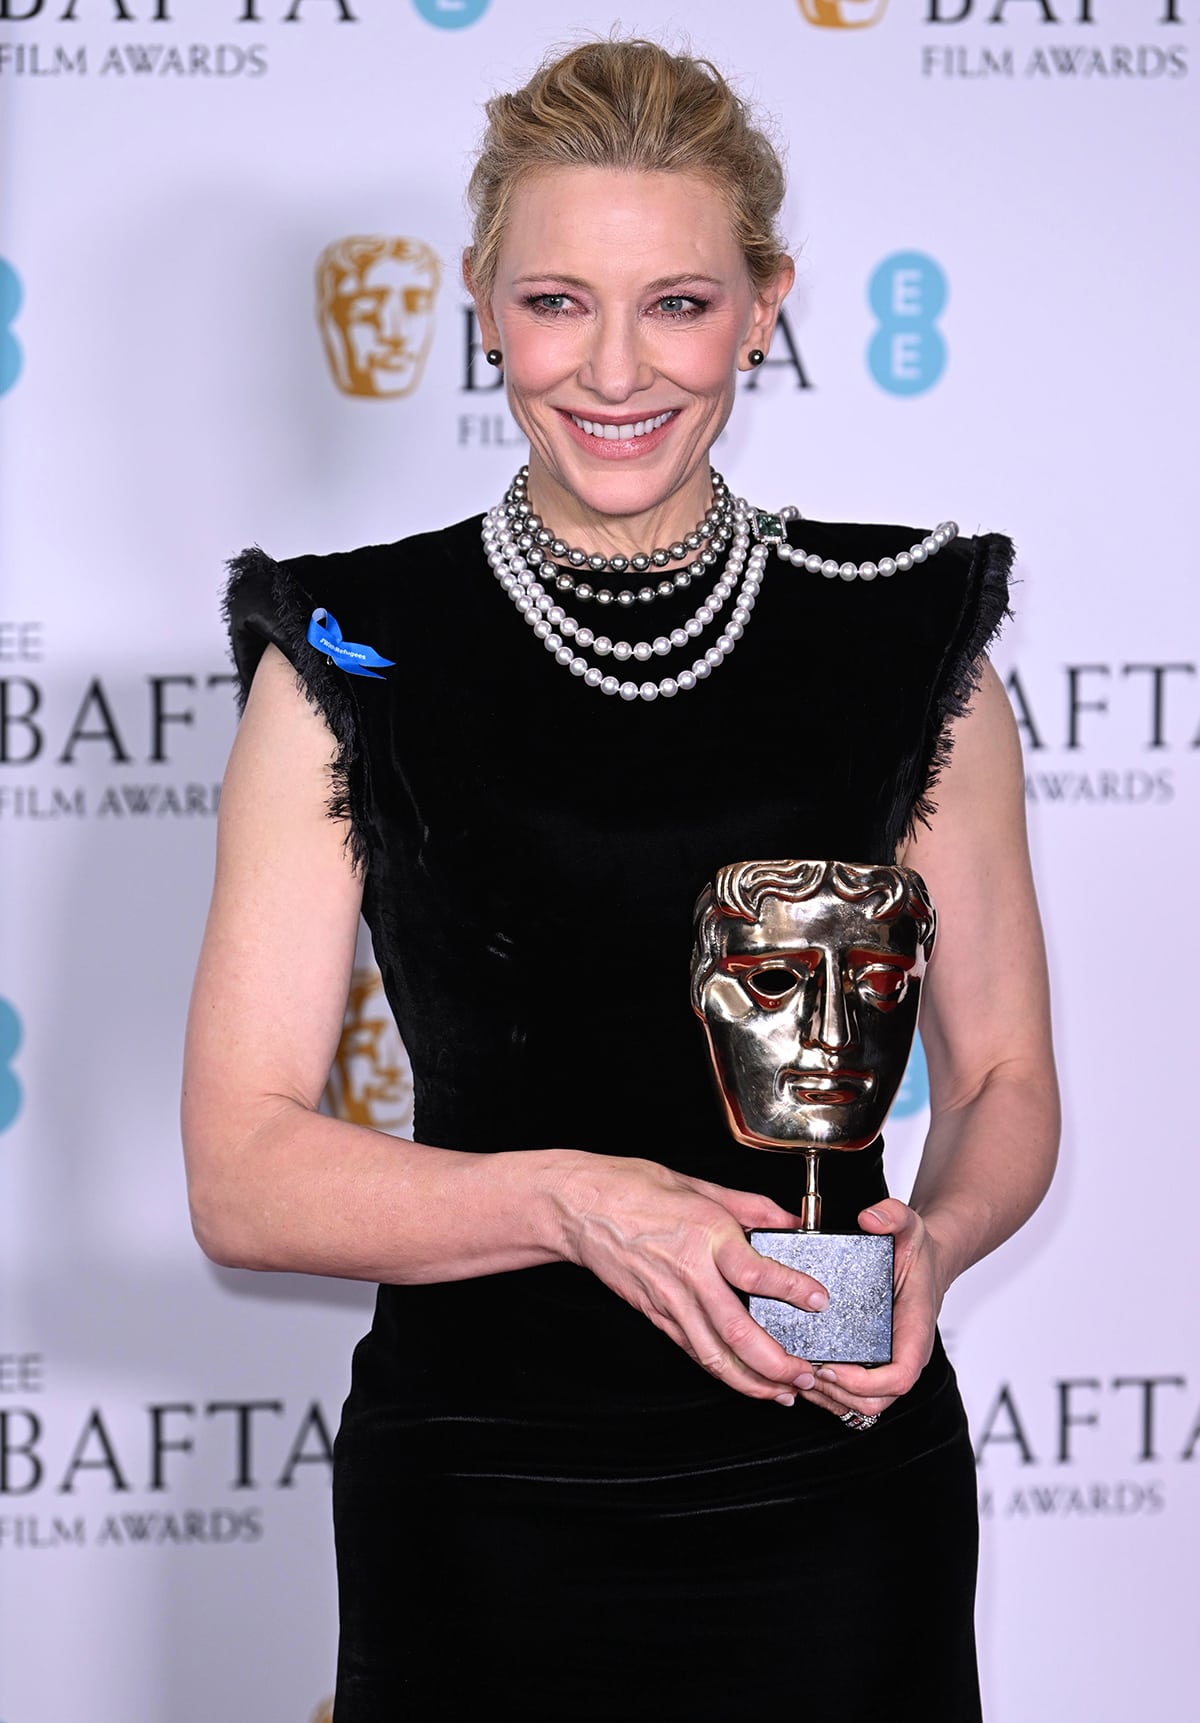 Cate Blanchett wins the BAFTA Best Actress for her role as a world-renowned lesbian conductor in Tár